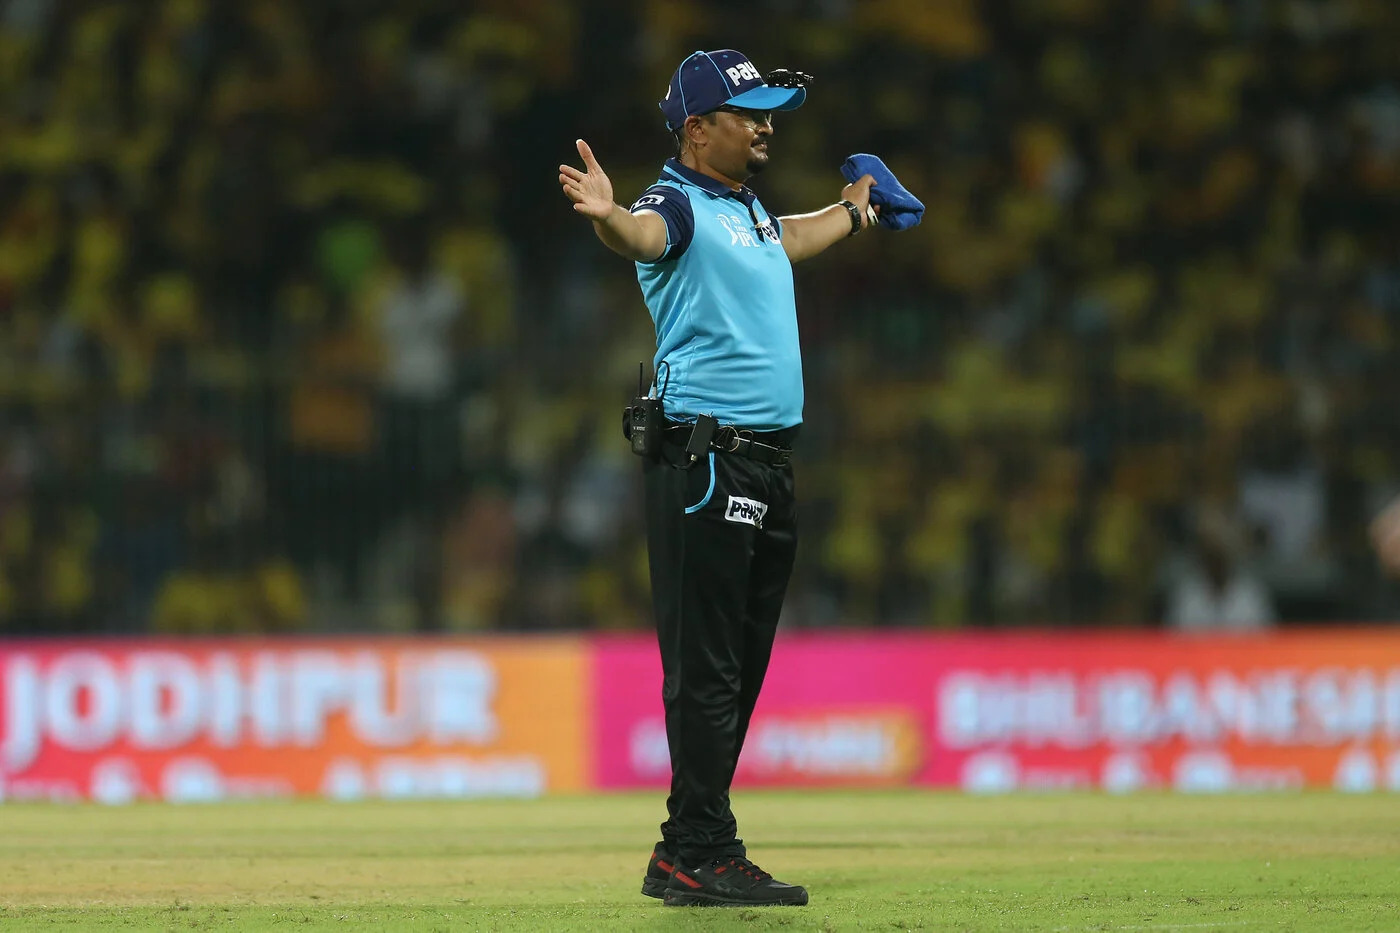 Akshay Totre makes his umpiring debut in the World Cup Warm-Up matches 